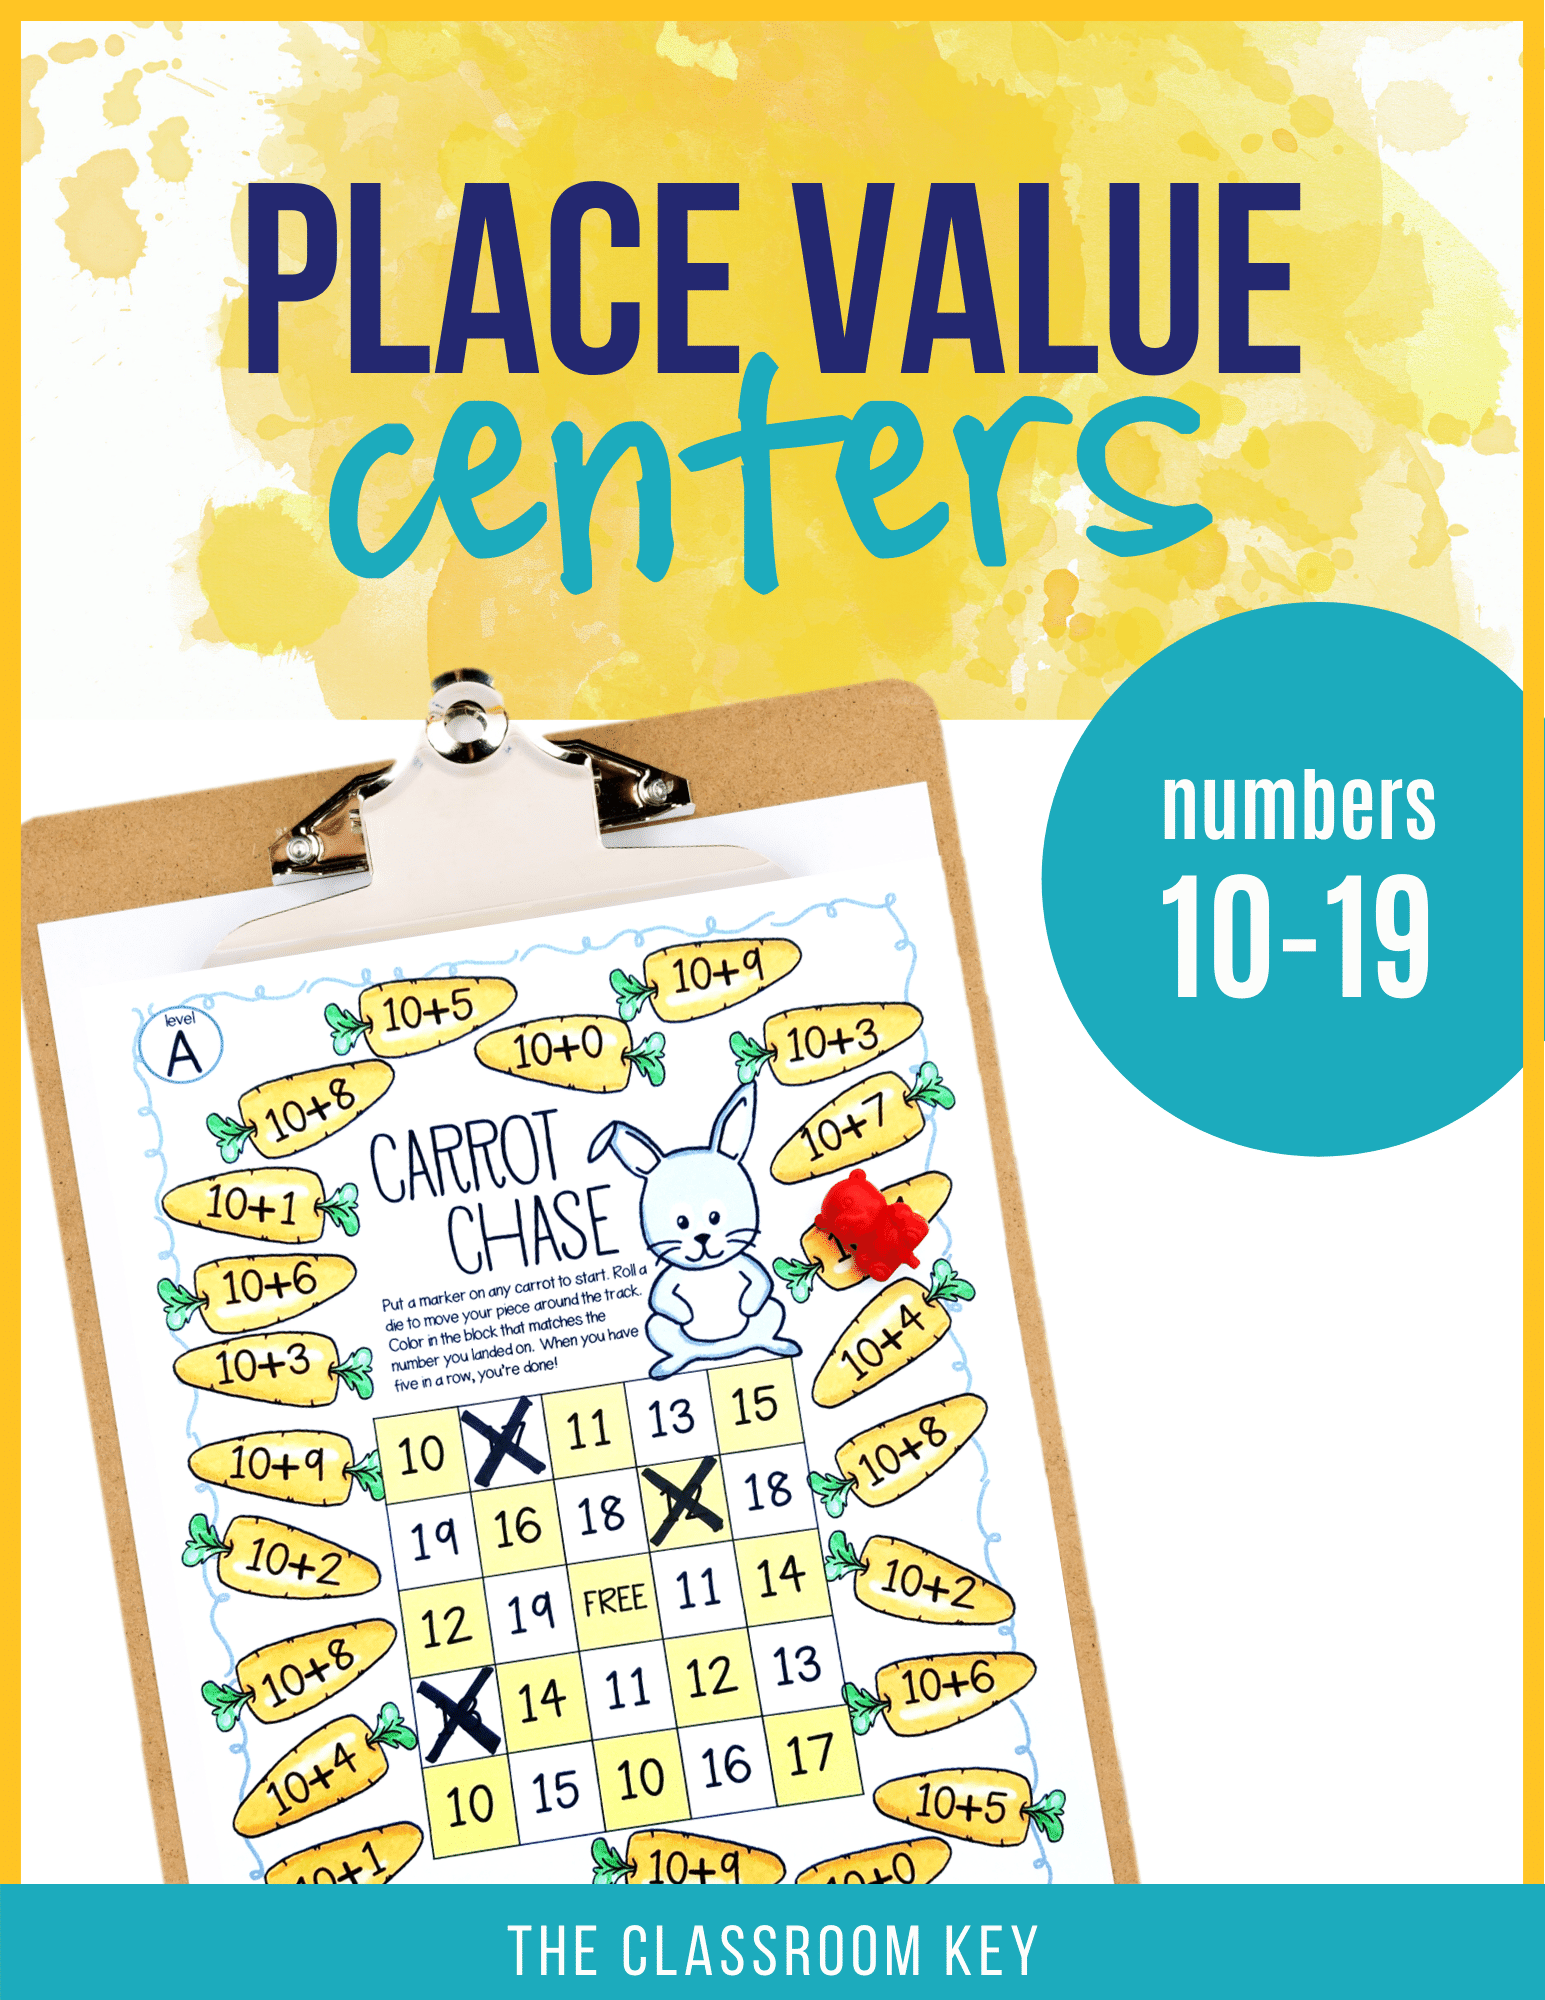 Practice place value skills for numbers 10 to 19 with center activities. Perfect for 1st graders starting to work with tens and ones, number words, and base-10 models. Addresses Common Core standards 1.NBT.B.2.A and 1.NBT.B.2.B